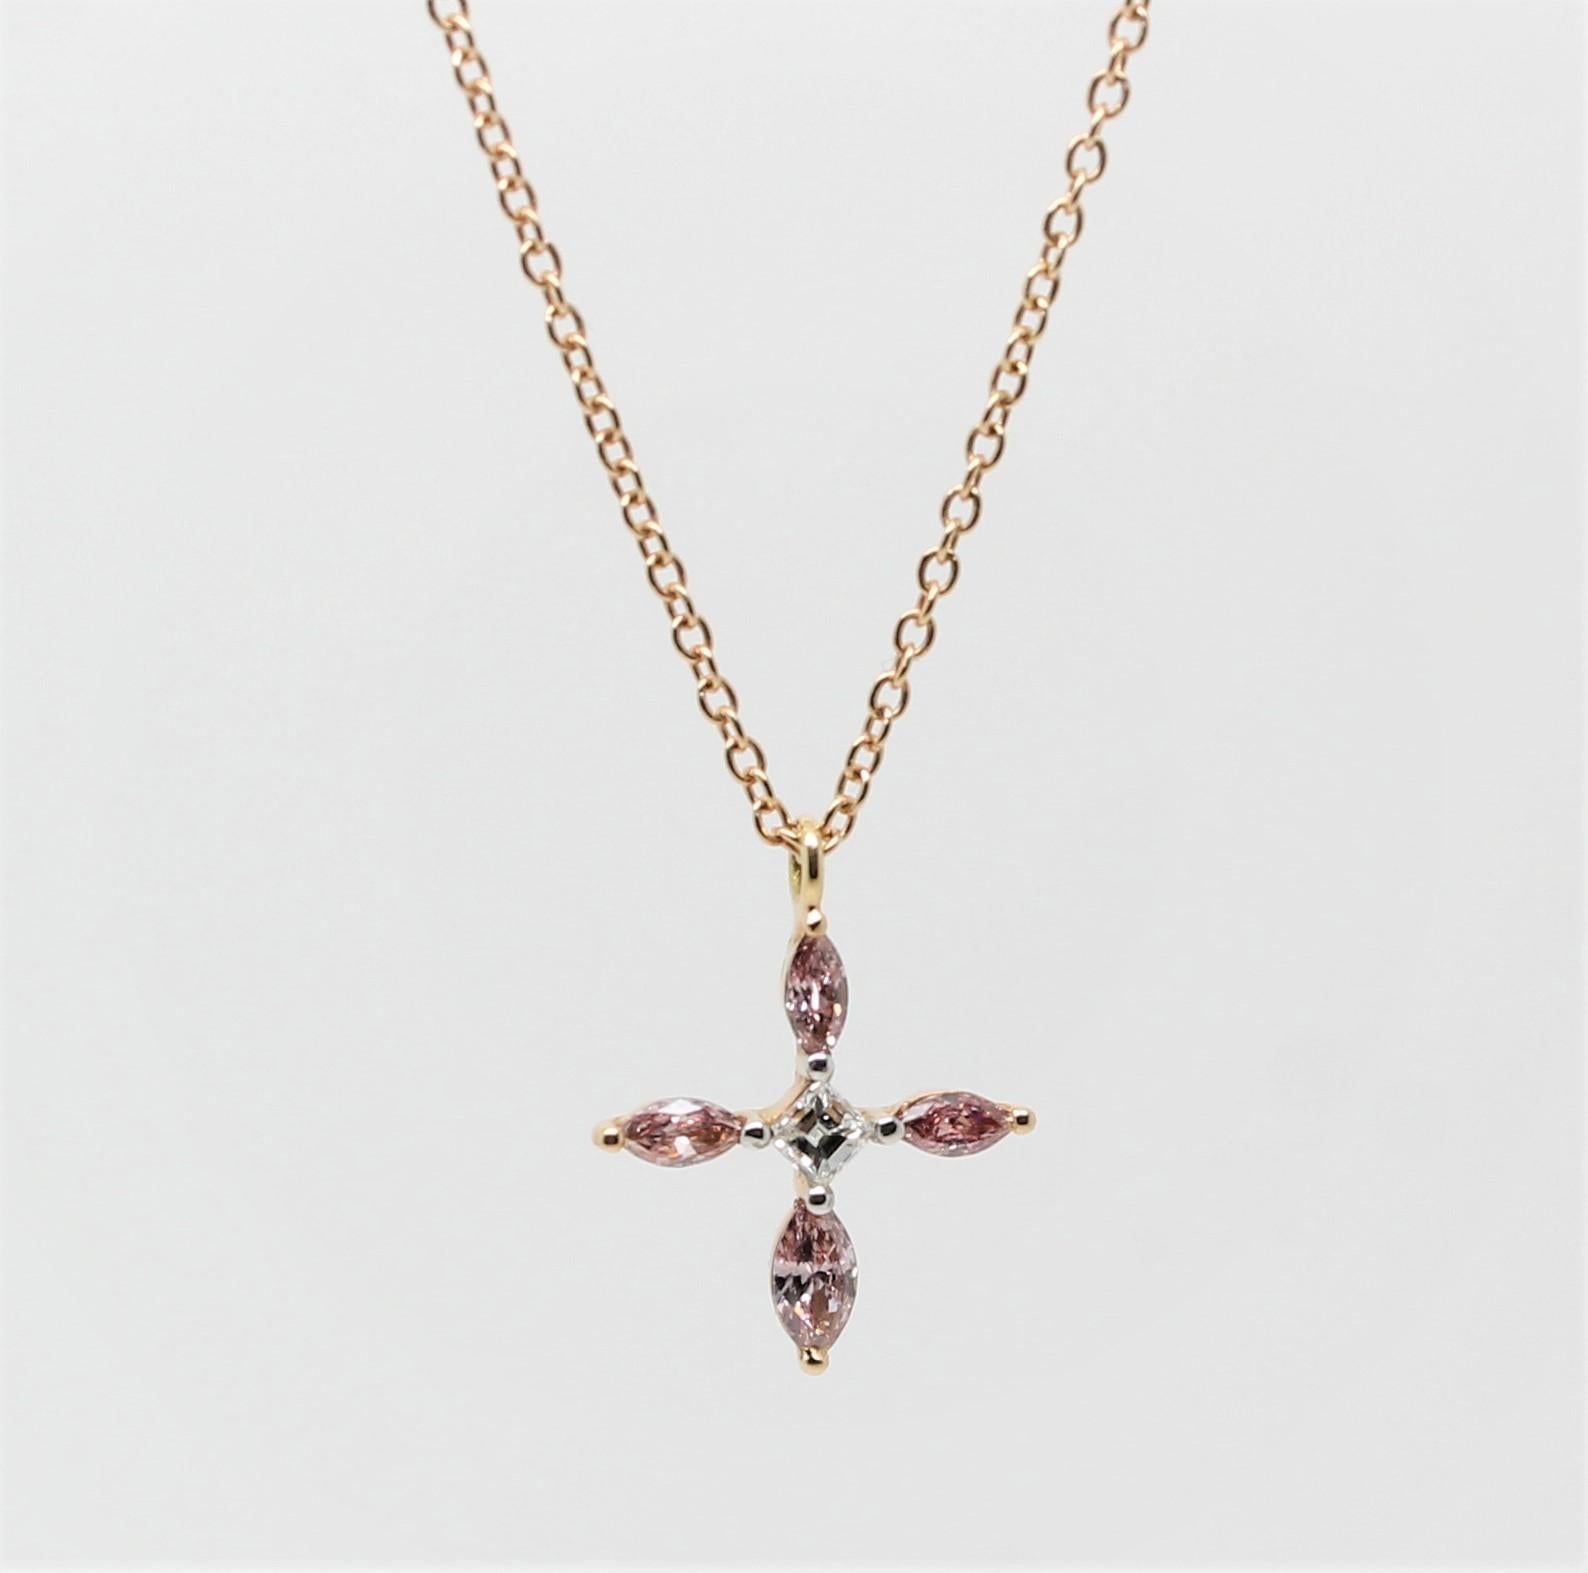  An elegant and sophisticated Cross Pendant Necklace composed by 4 Argyle Pink Natural Colour Marquise Diamonds and 1 White Princess Cut Diamond in the centre, for a total of  0.40 Carat. 
The Cross Pendant Necklace is in 18Kt Rose Gold, with a Rose